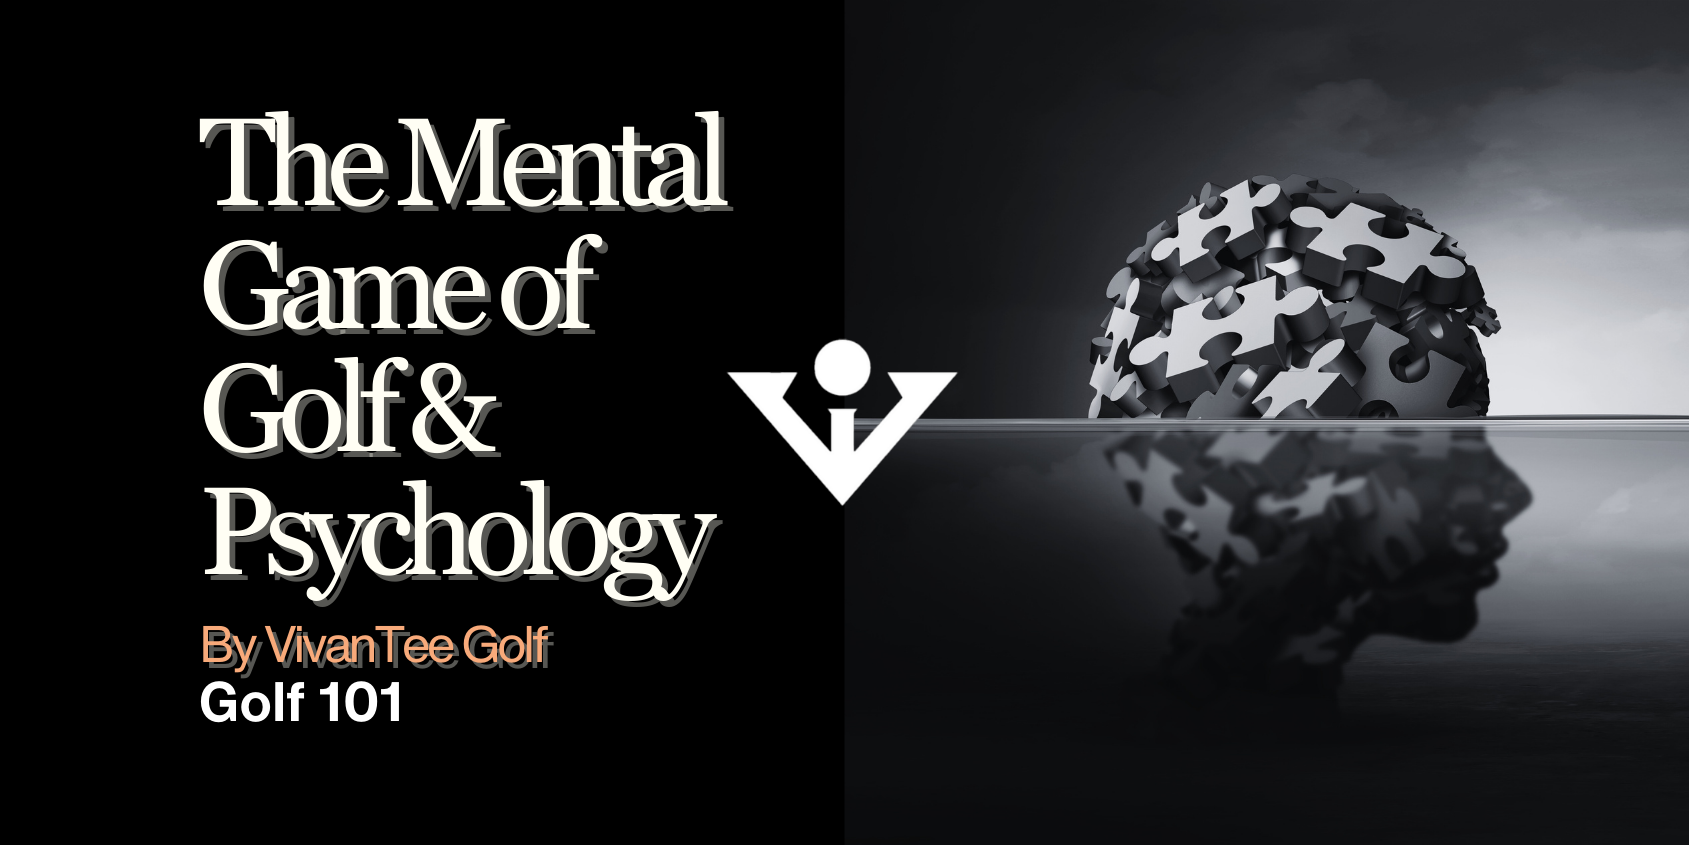 The Mental Game of Golf | Golf Psychology our banner for the comprehensive guide discussing Golf Psychology tips and books.